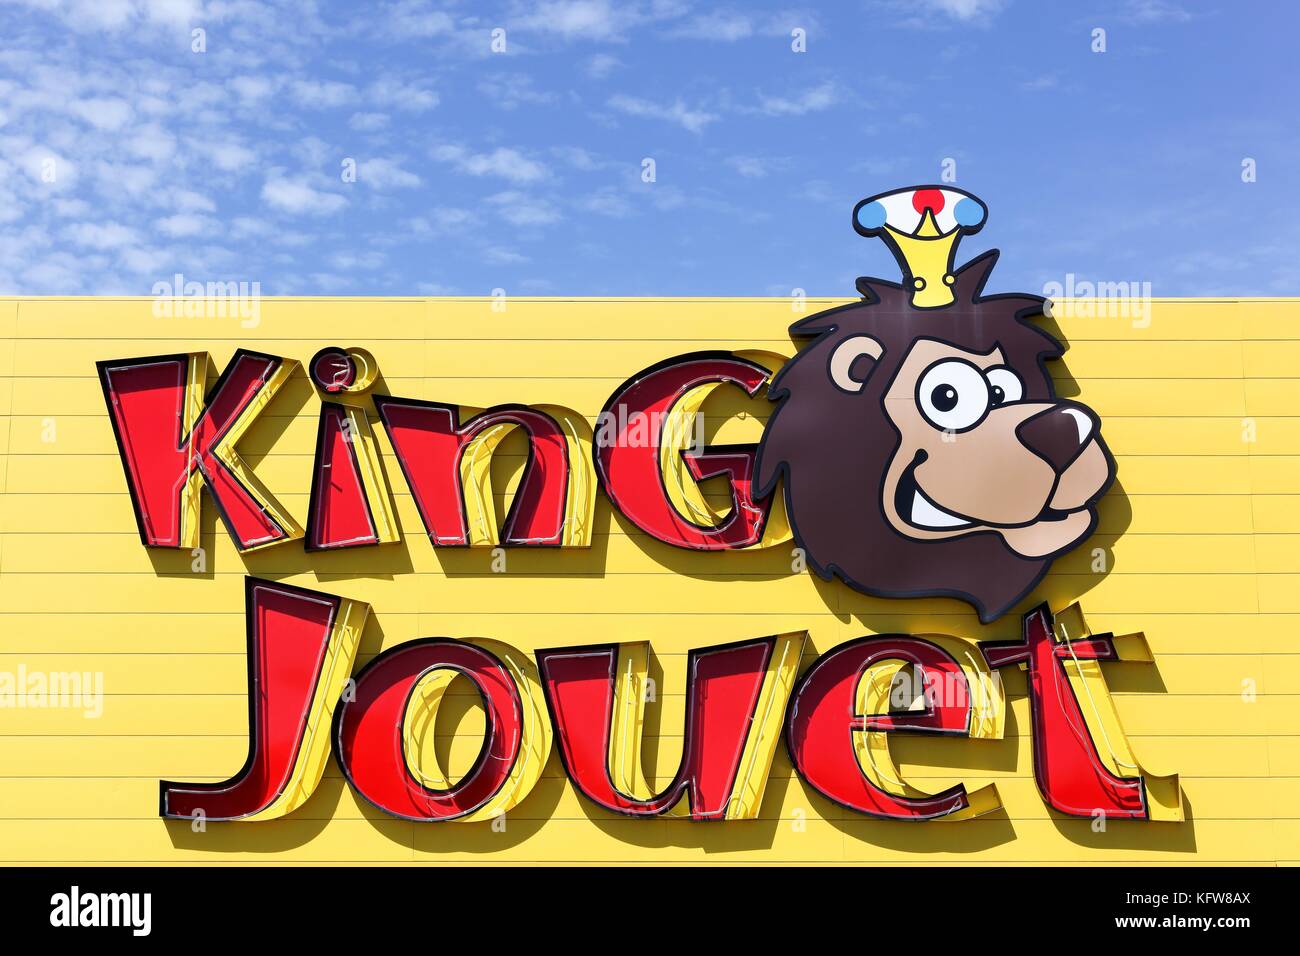 Villefranche, France - June 11, 2017: King Jouet logo on a wall. King Jouet  is is a French toy and juvenile products retailer Stock Photo - Alamy